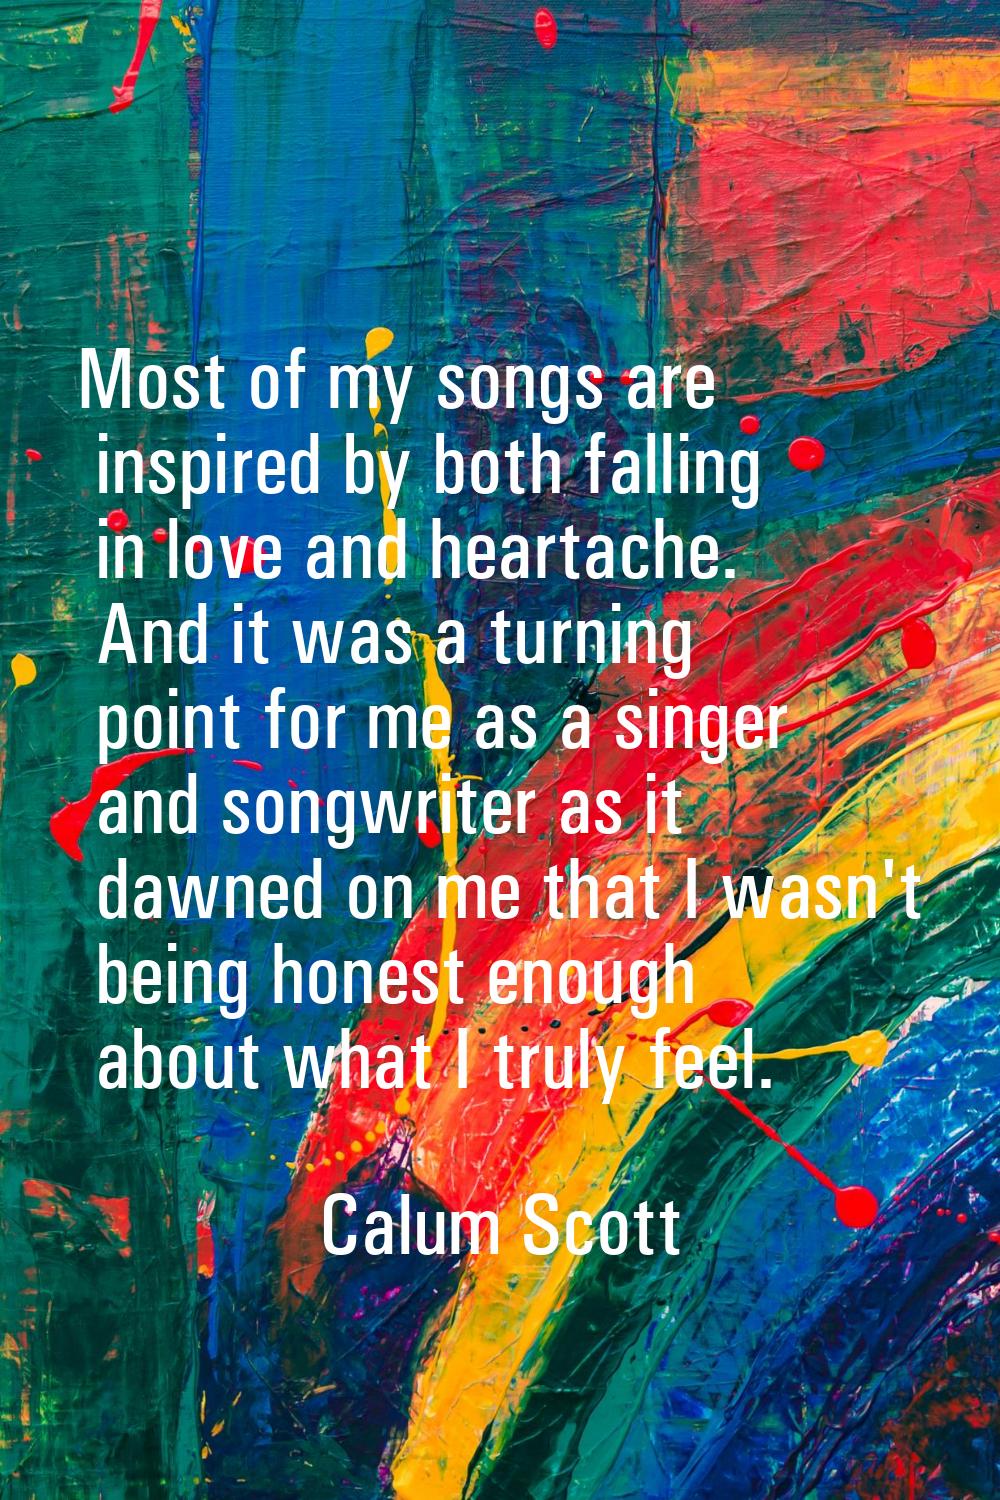 Most of my songs are inspired by both falling in love and heartache. And it was a turning point for